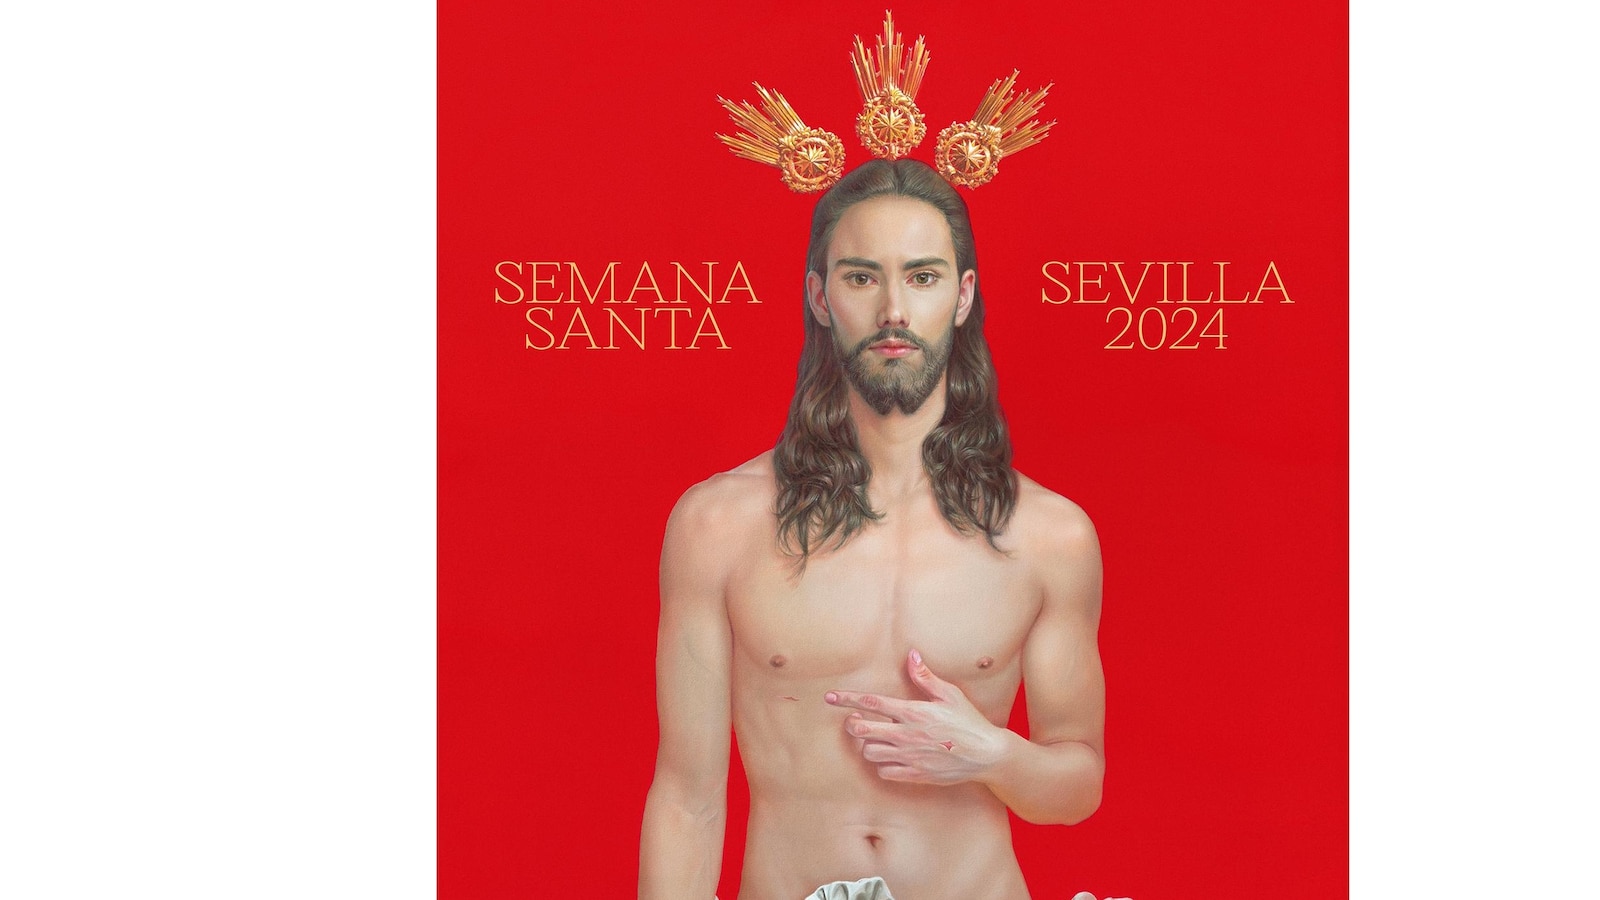 Controversy Arises in Spain over Easter Poster Featuring a Youthful and Attractive Depiction of Jesus